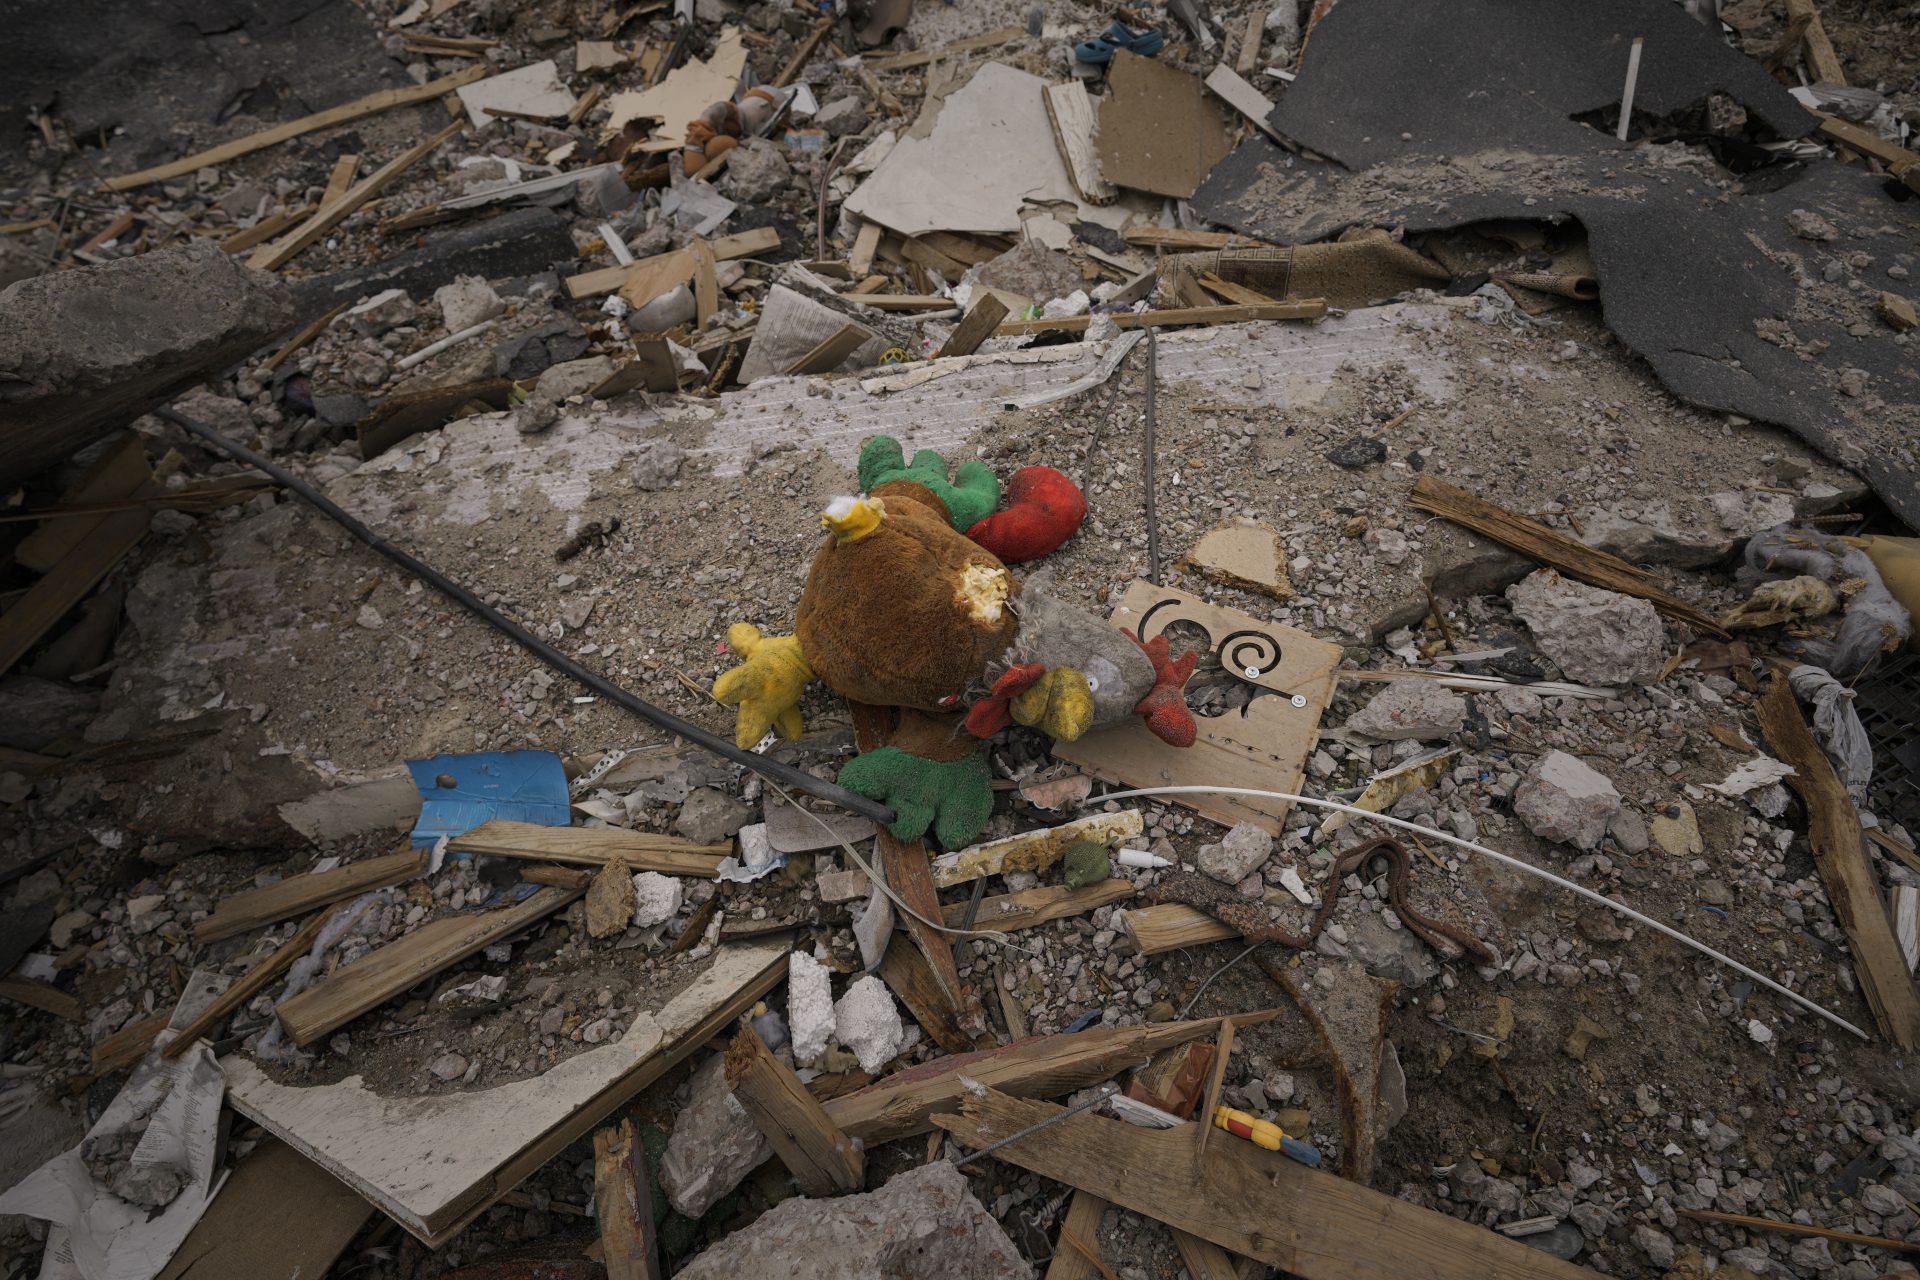 A toy lies in the rubble of an apartment building destroyed during fighting between Ukrainian and Russian forces in Borodyanka, Ukraine, Tuesday, April 5, 2022.